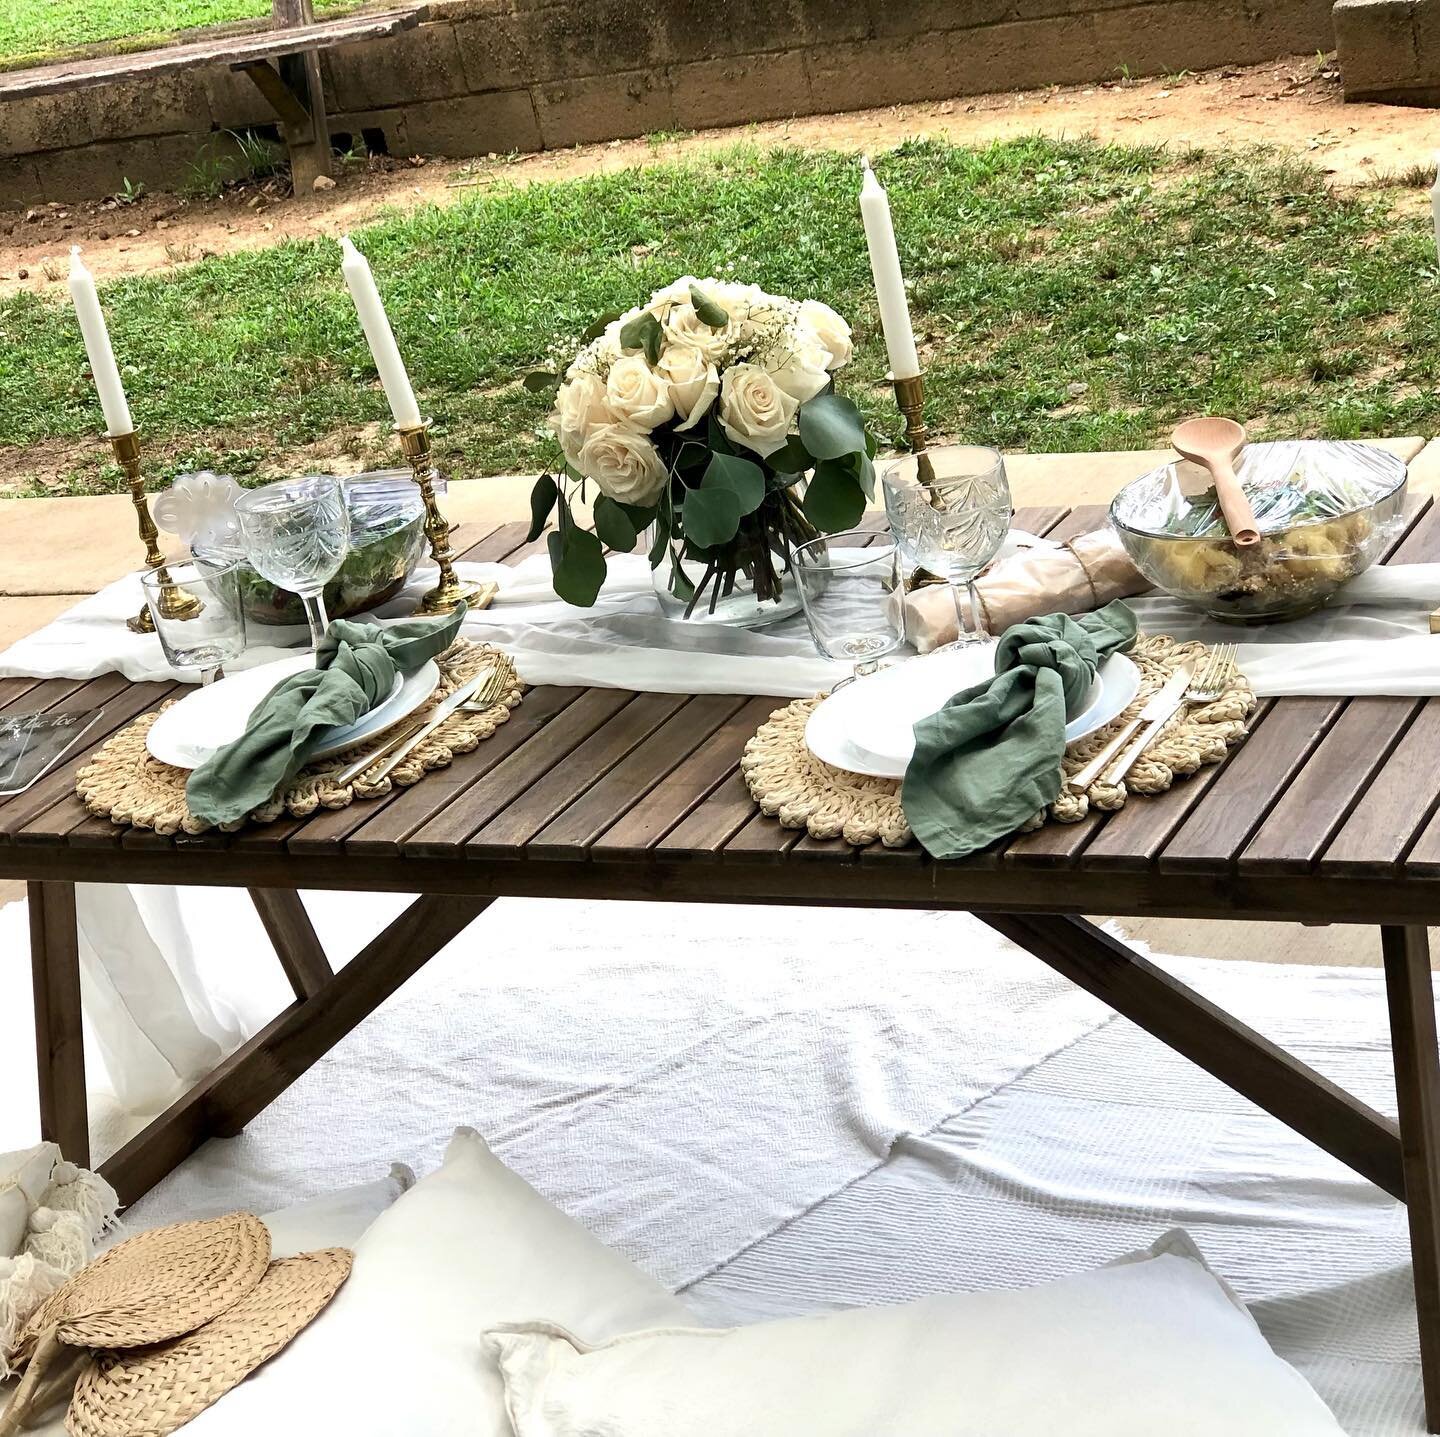 There&rsquo;s just something about small intimate picnics that say &ldquo;I love you!&rdquo;💕💕
We love when you all allow us to help you express that!✨
.
.
.
.
.

#thegatheringpicnicco&nbsp;#clt&nbsp;#cltpicnic&nbsp;#cltpicnics&nbsp;#charlottedate&